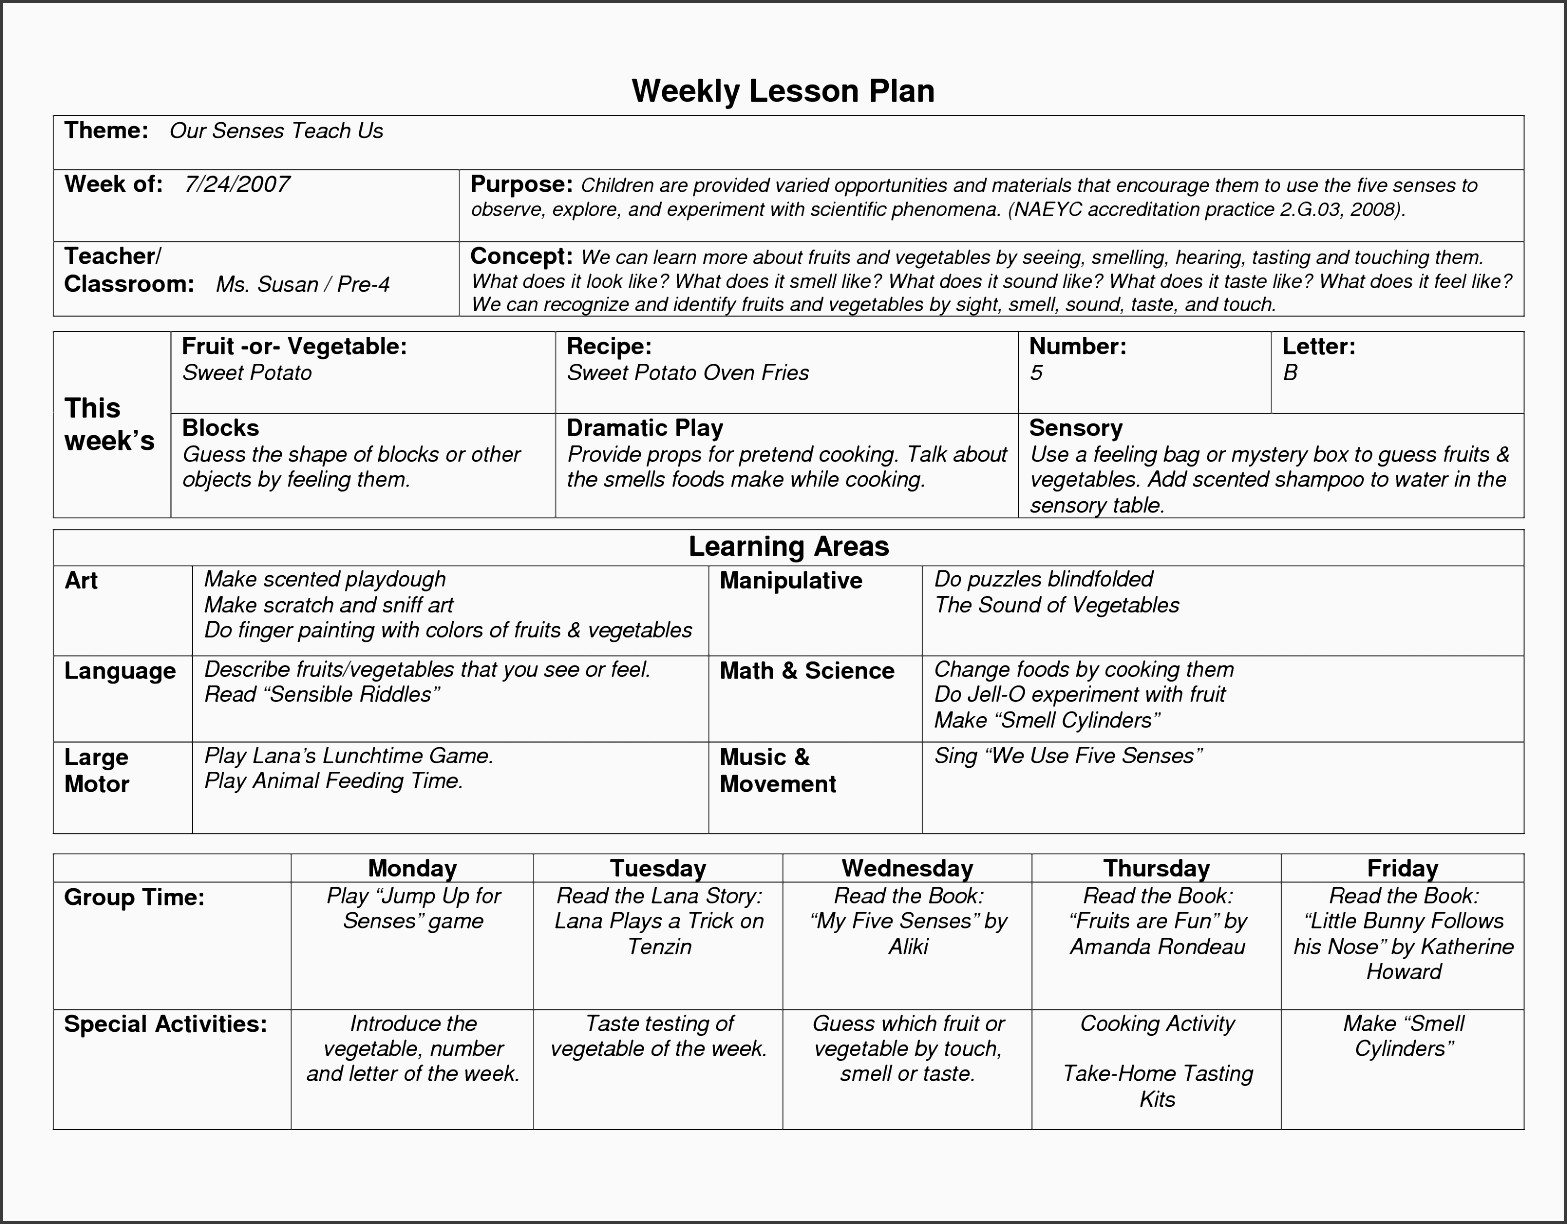 Creating A Lesson Plan 6 How to Make Weekly Time Planner Sampletemplatess